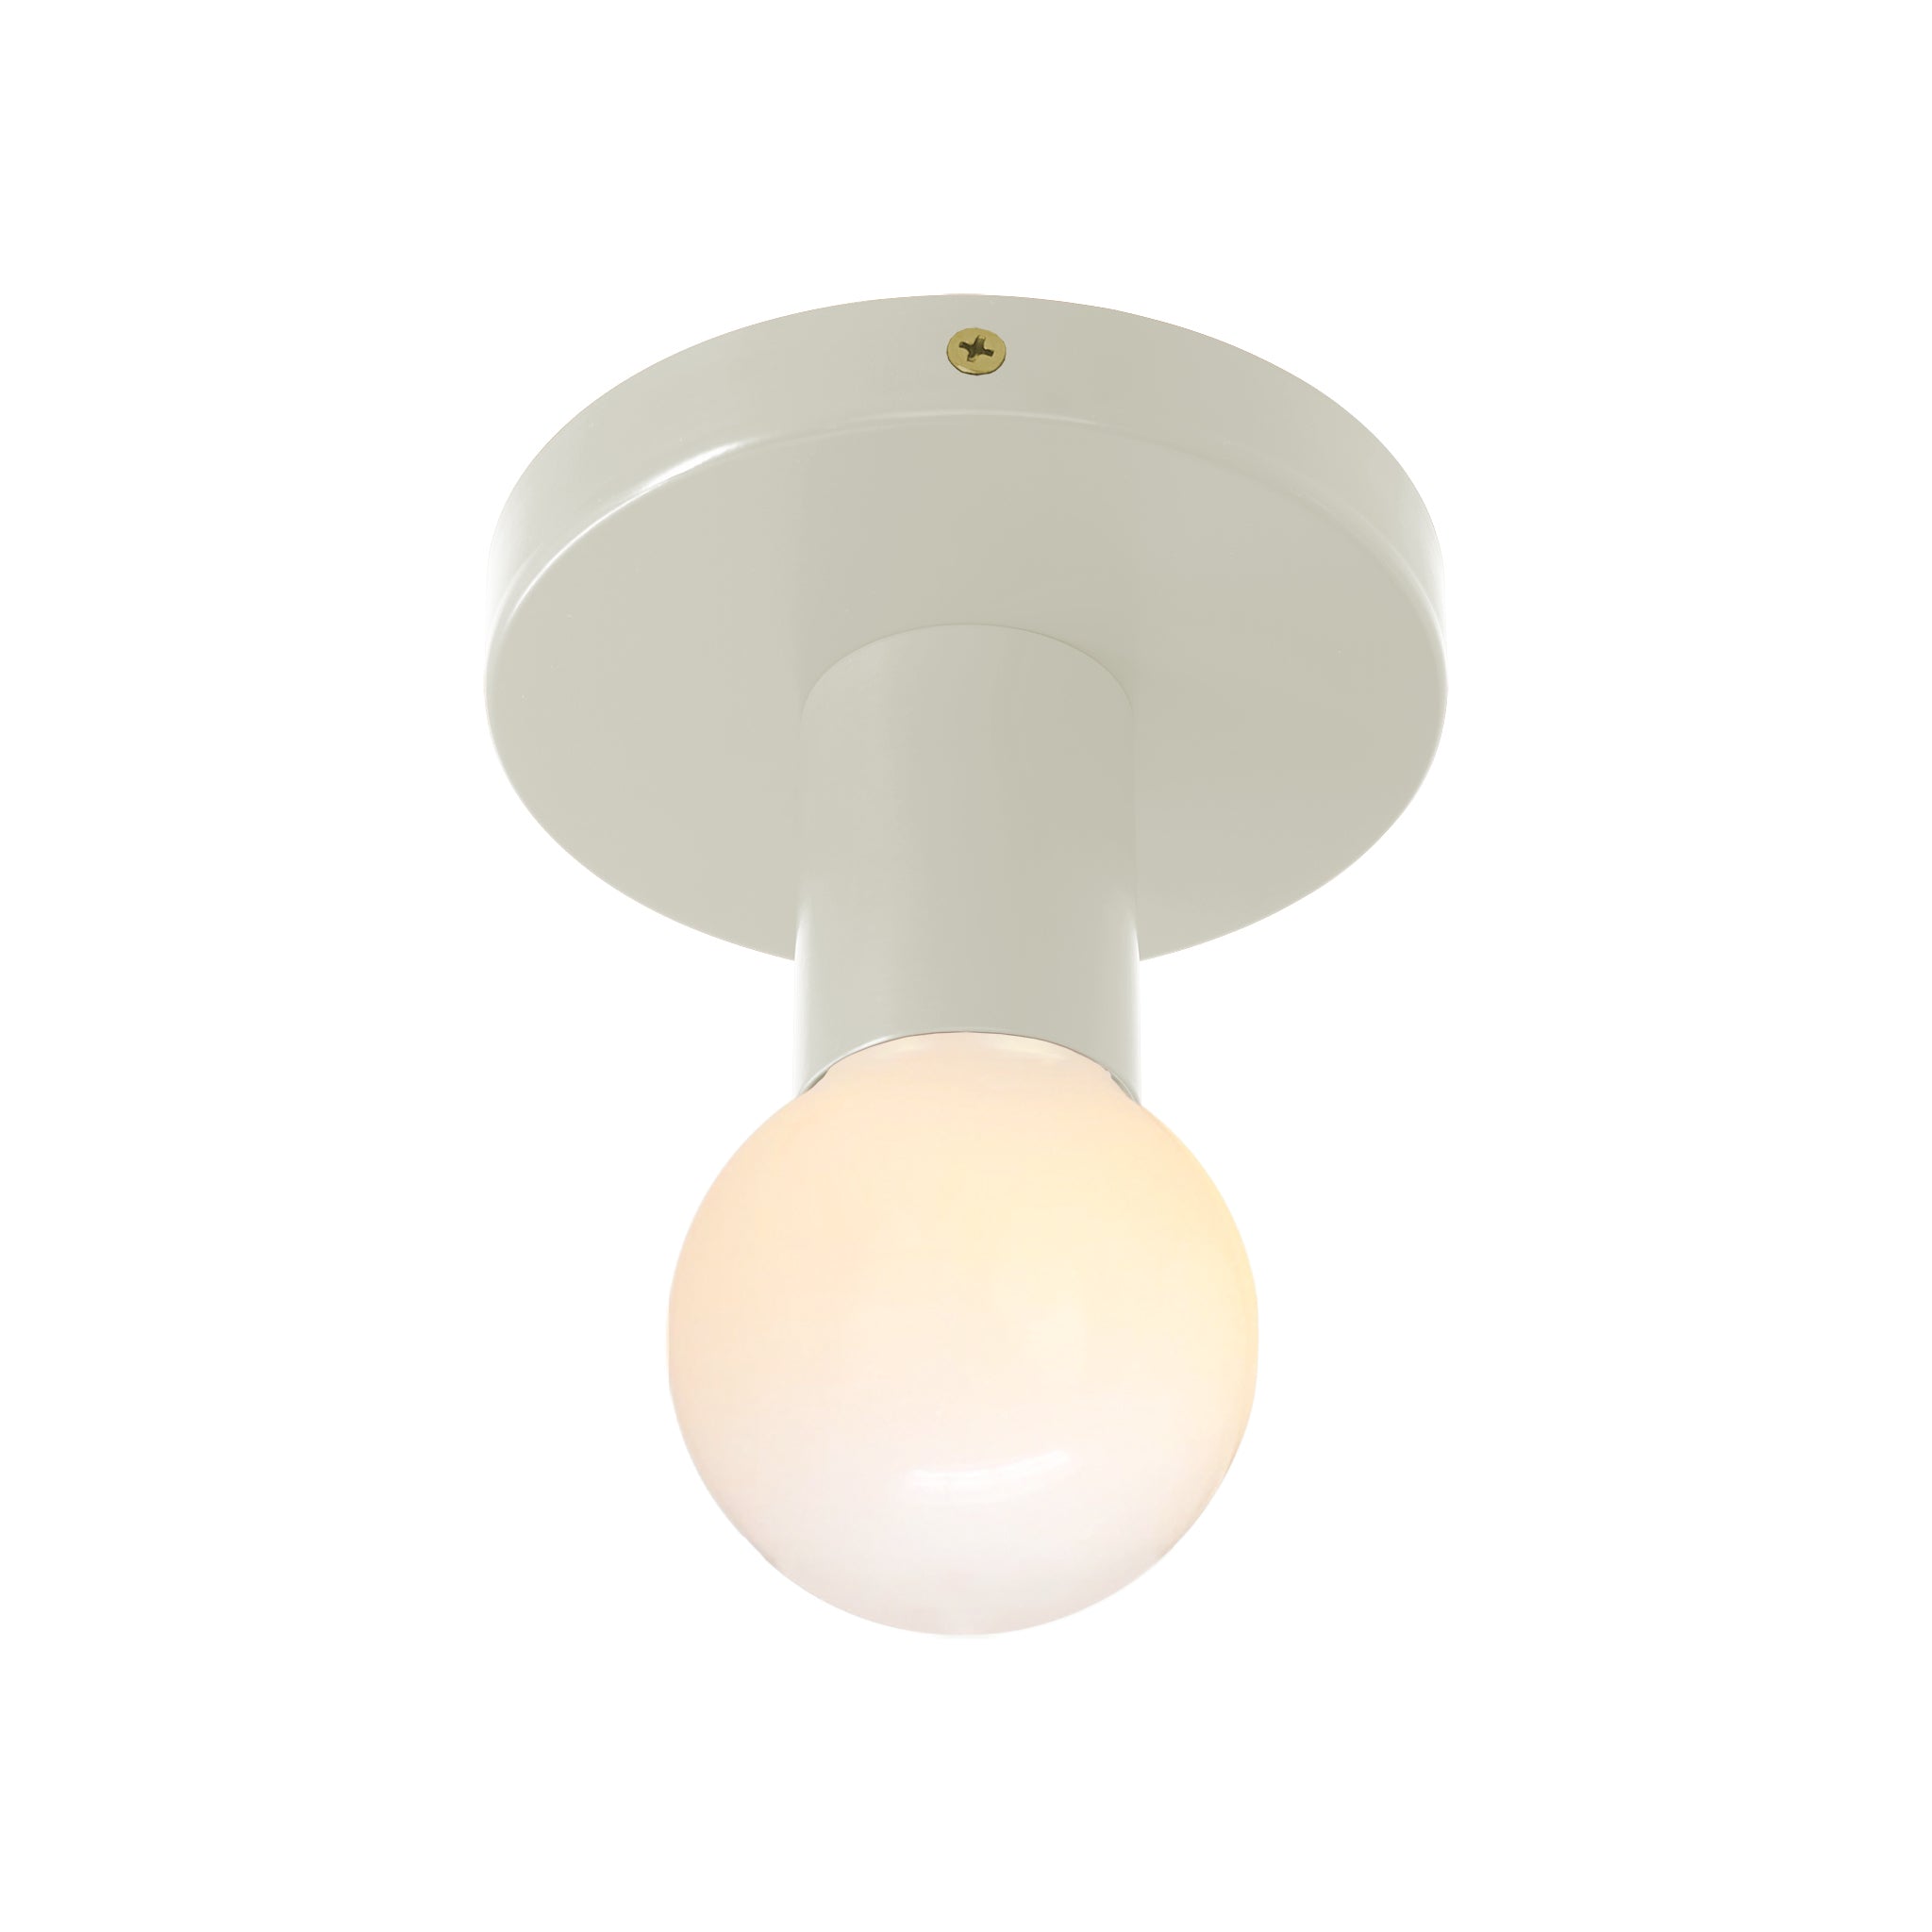 Brass and bone color Twink flush mount Dutton Brown lighting